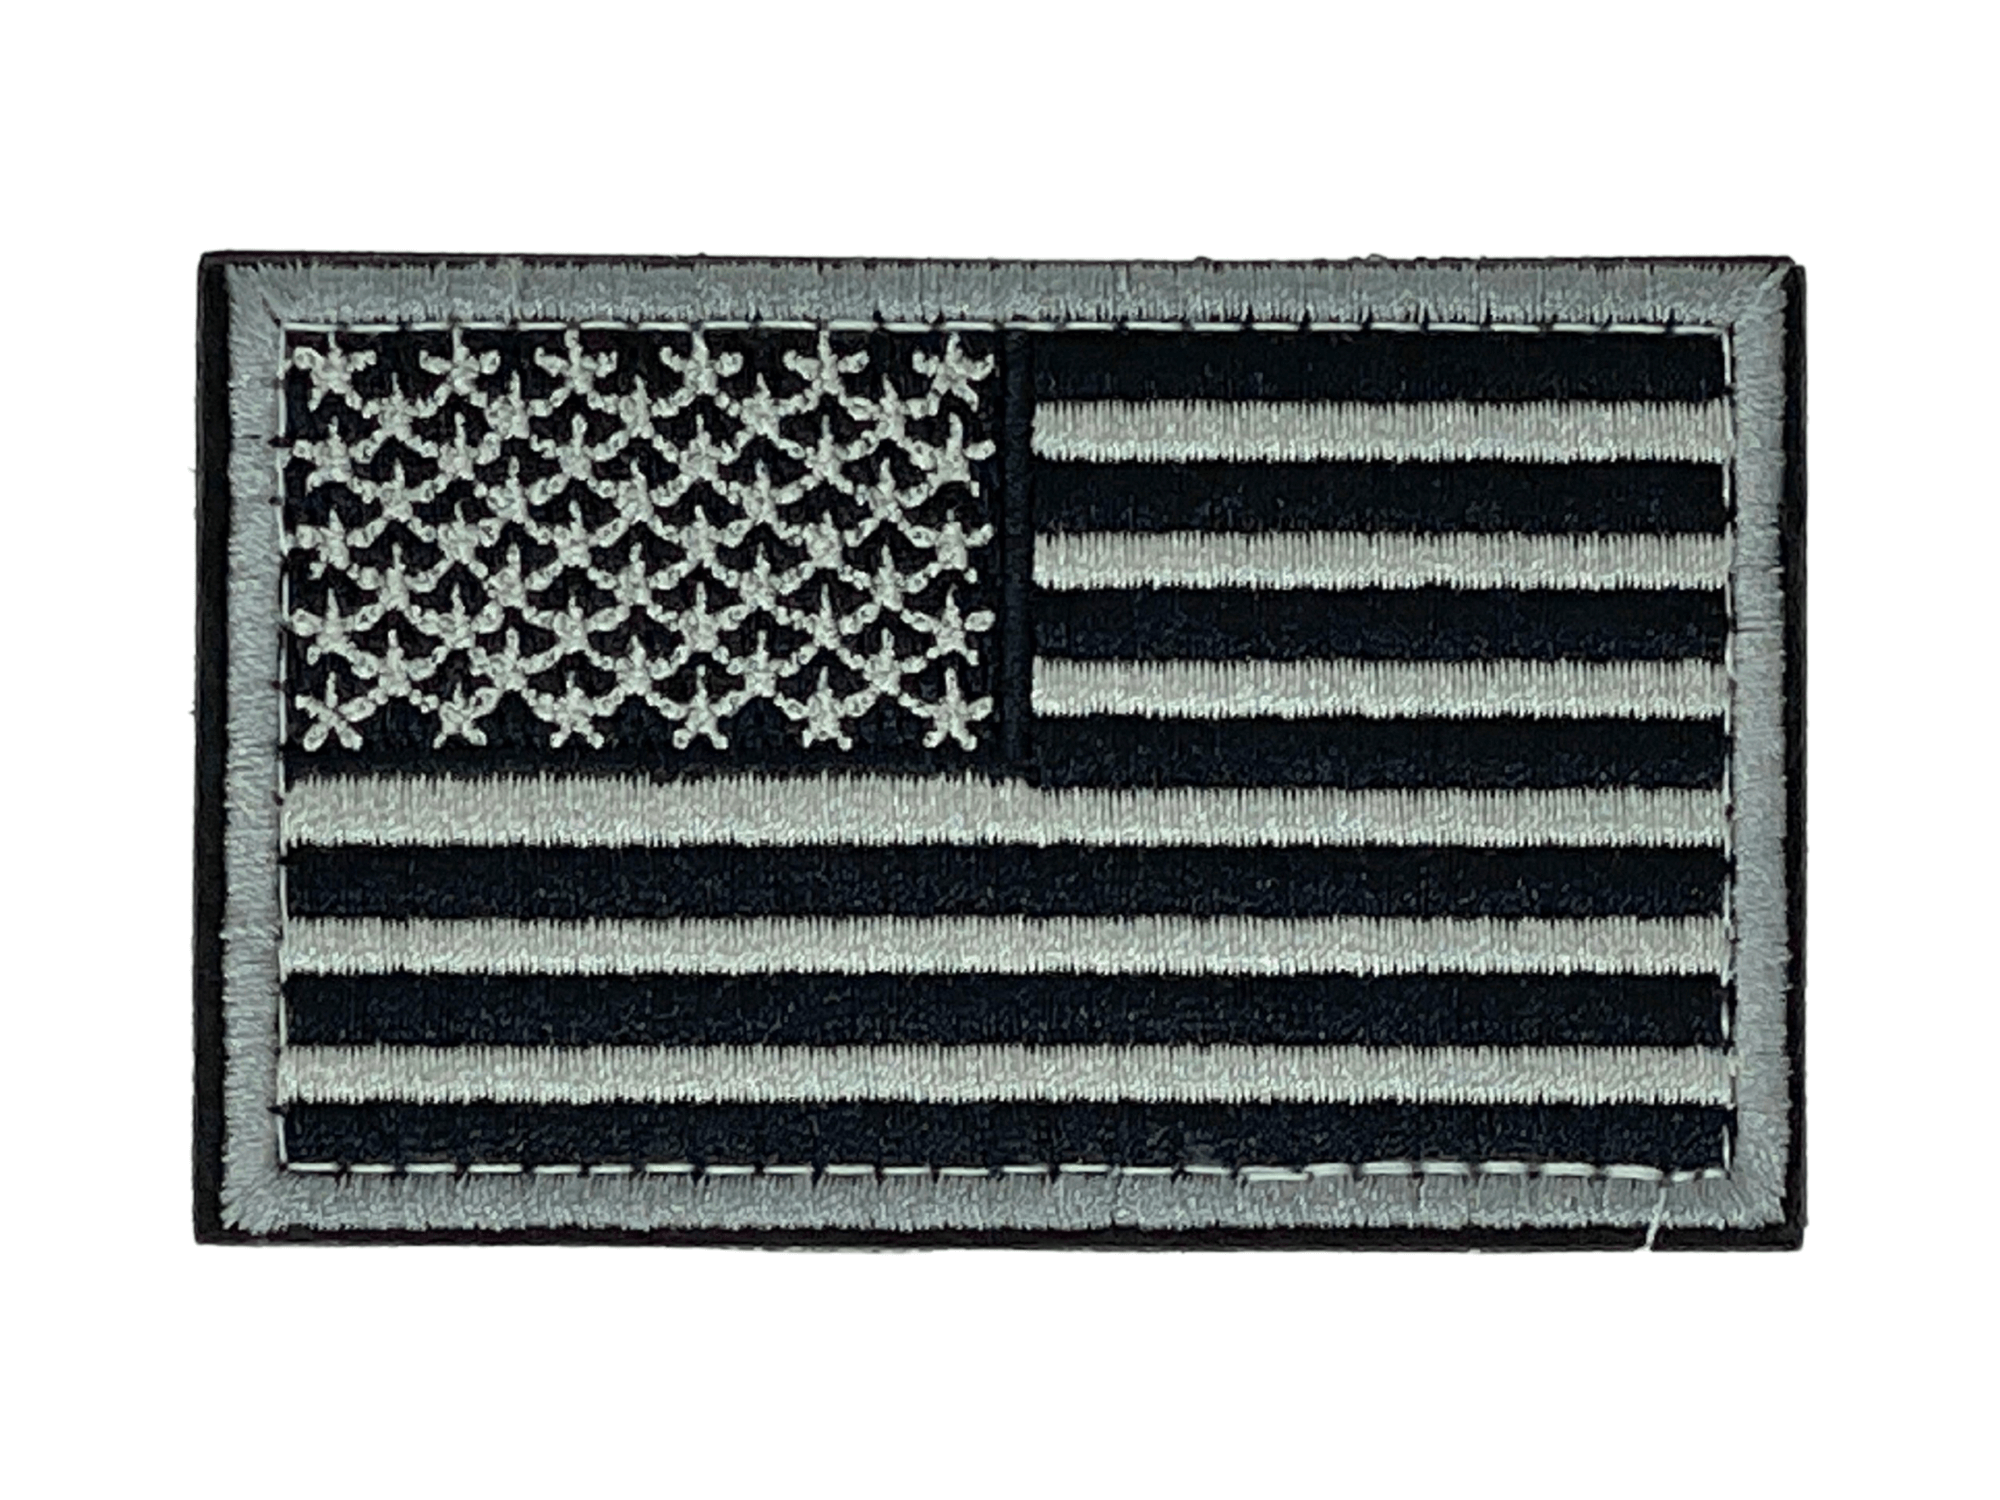 Tactical USA Flag Patch with Detachable Backing - Blue Line